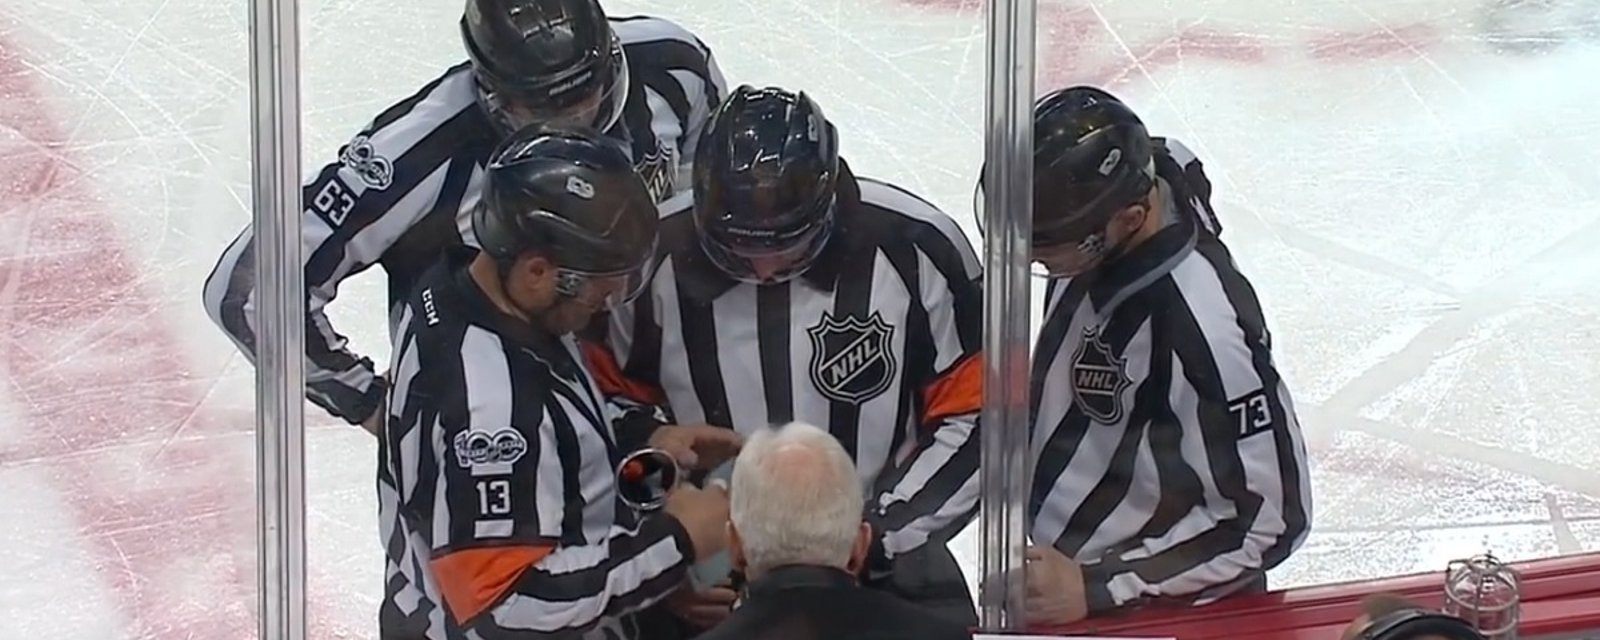 Breaking: NHL officials eject a player for playing as a healthy scratch.